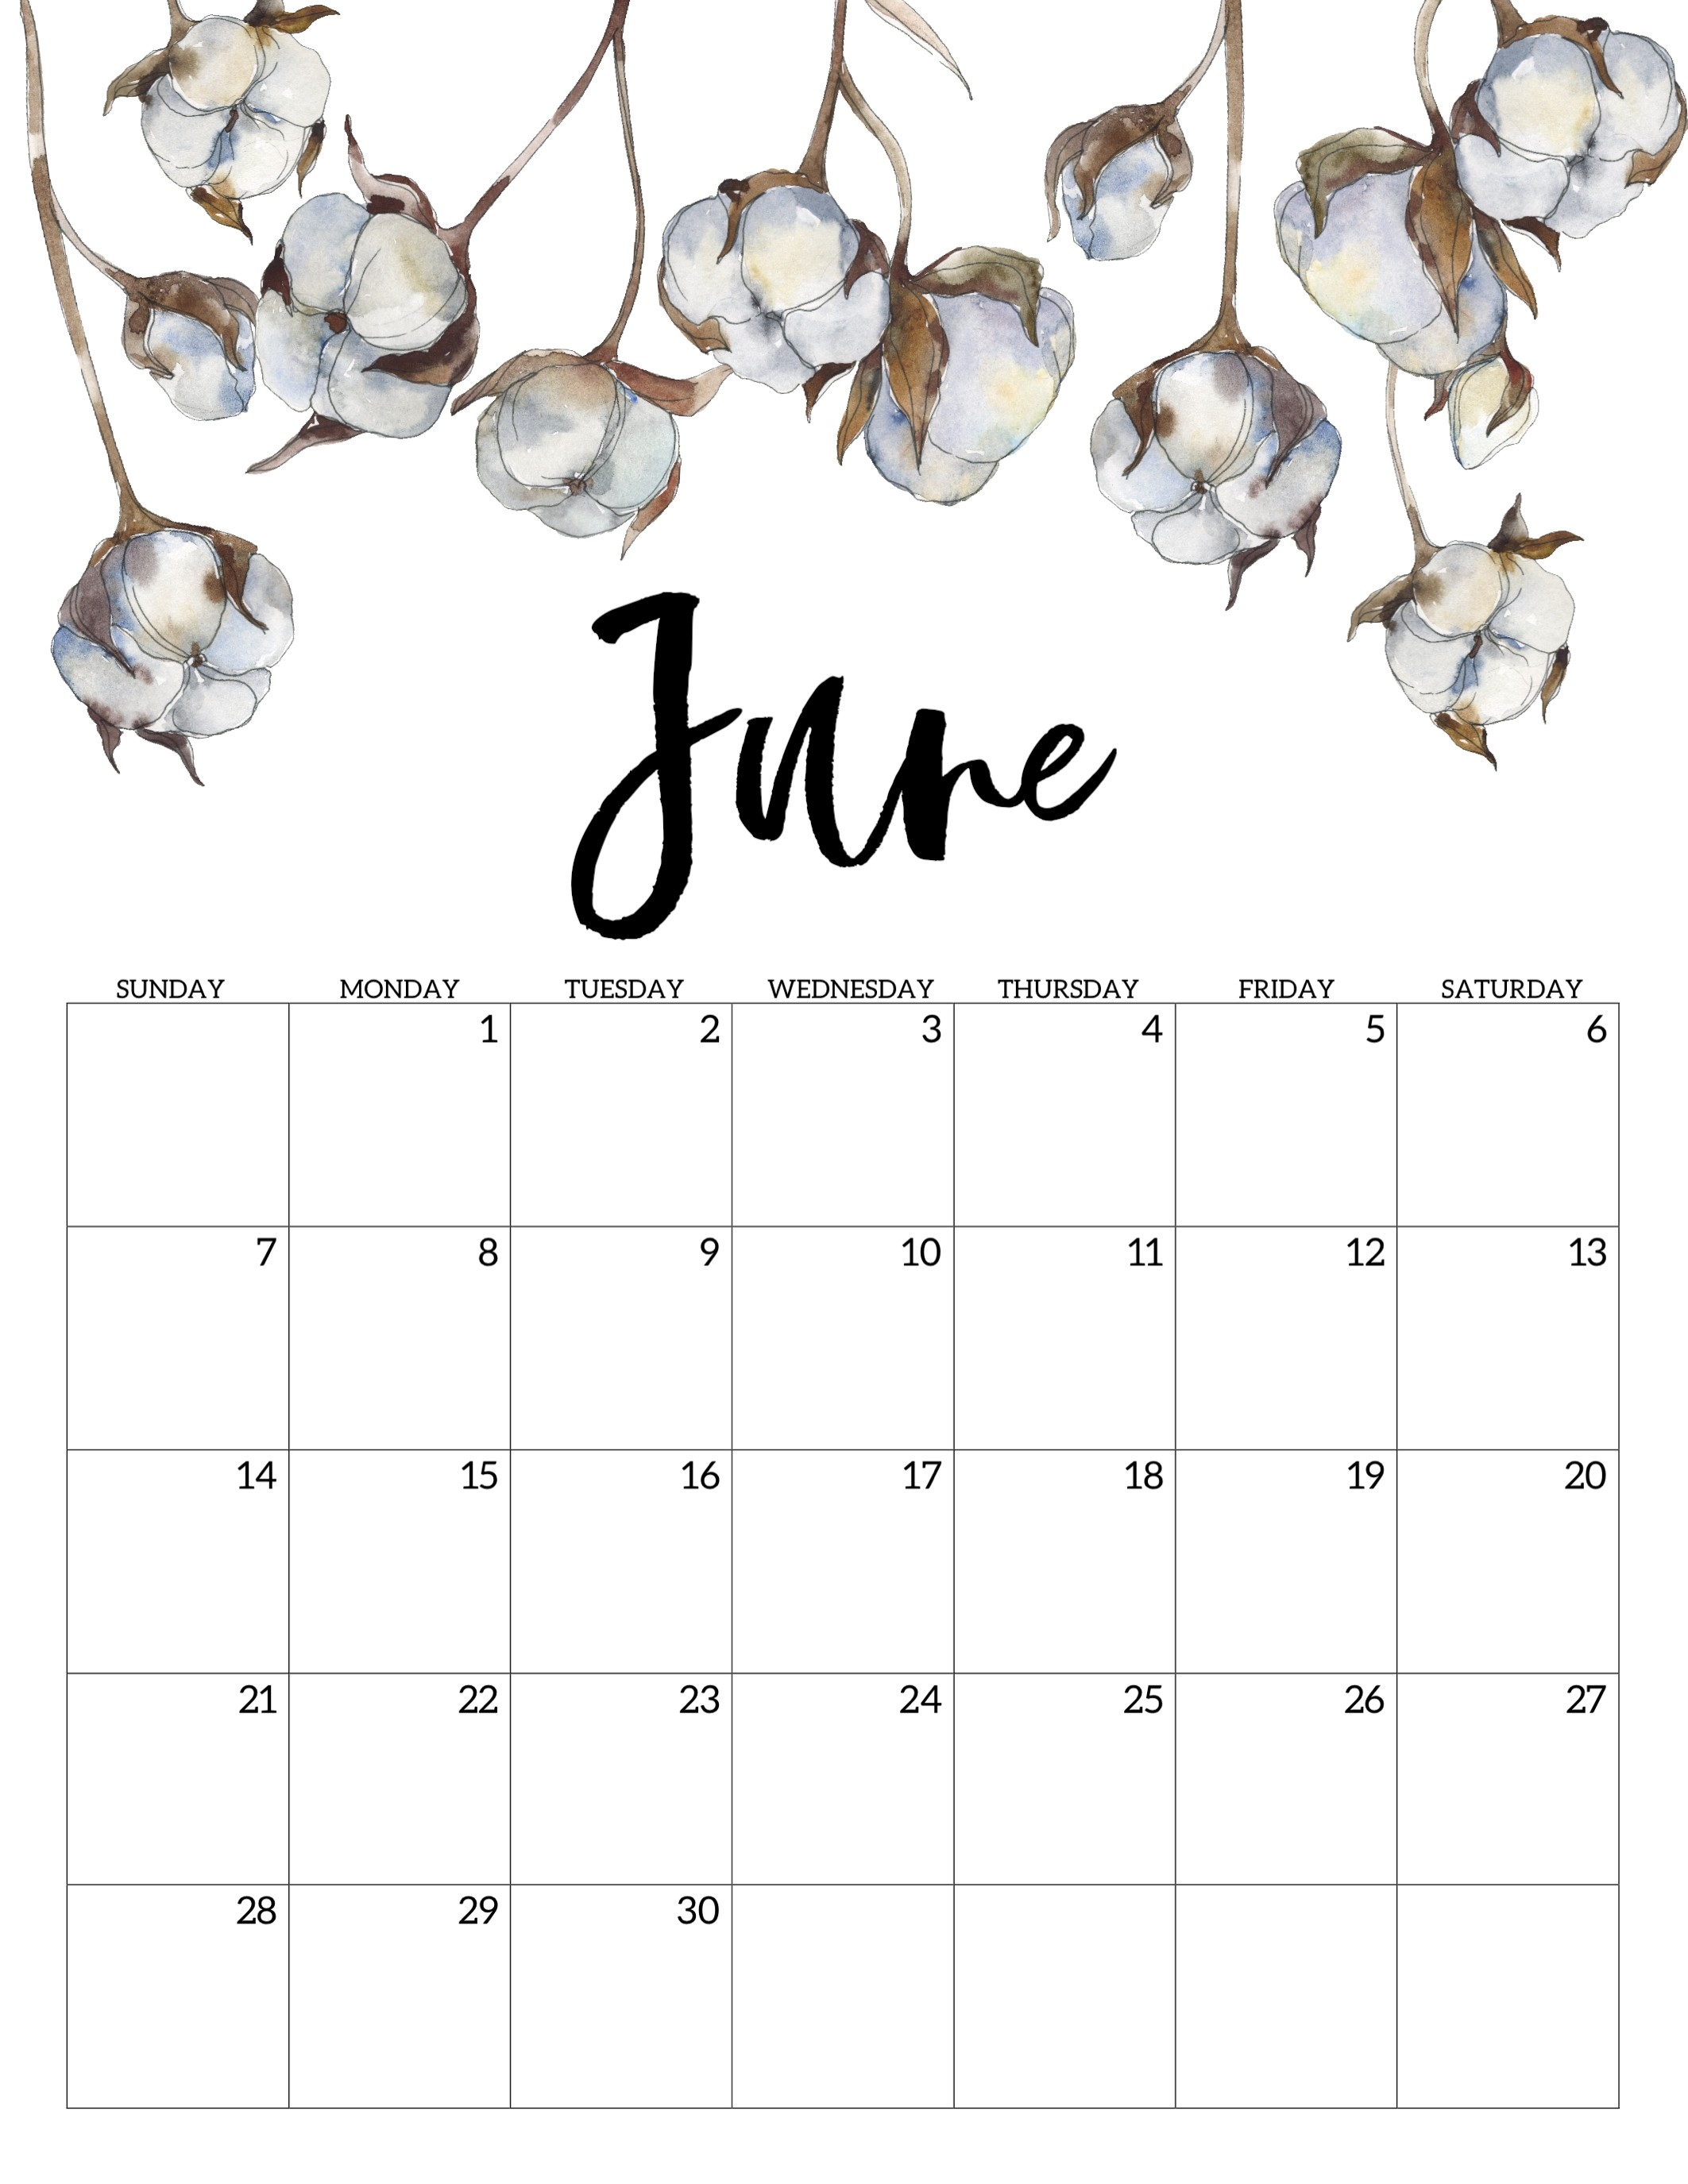 2020 Free Printable Calendar - Floral - Paper Trail Design  Printable 2020 Monthly Calendar Template Girly